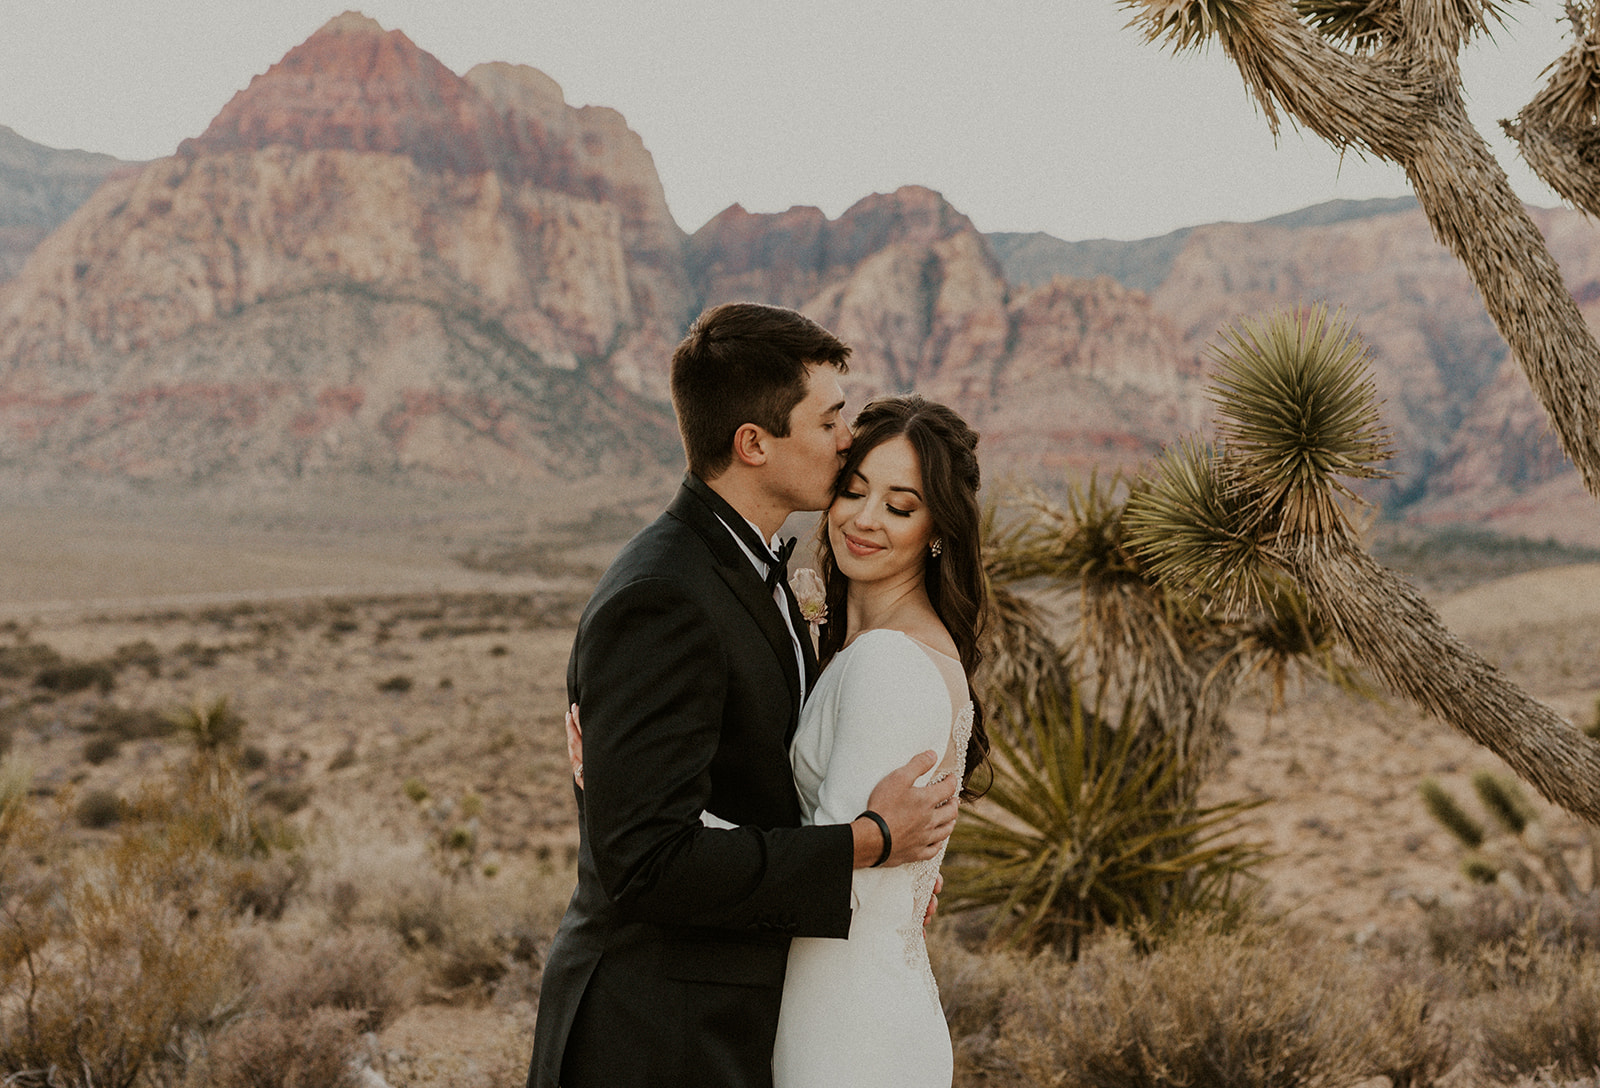 Groom planting a kiss on bride's temple as she smiles during their Las Vegas elopement shoot